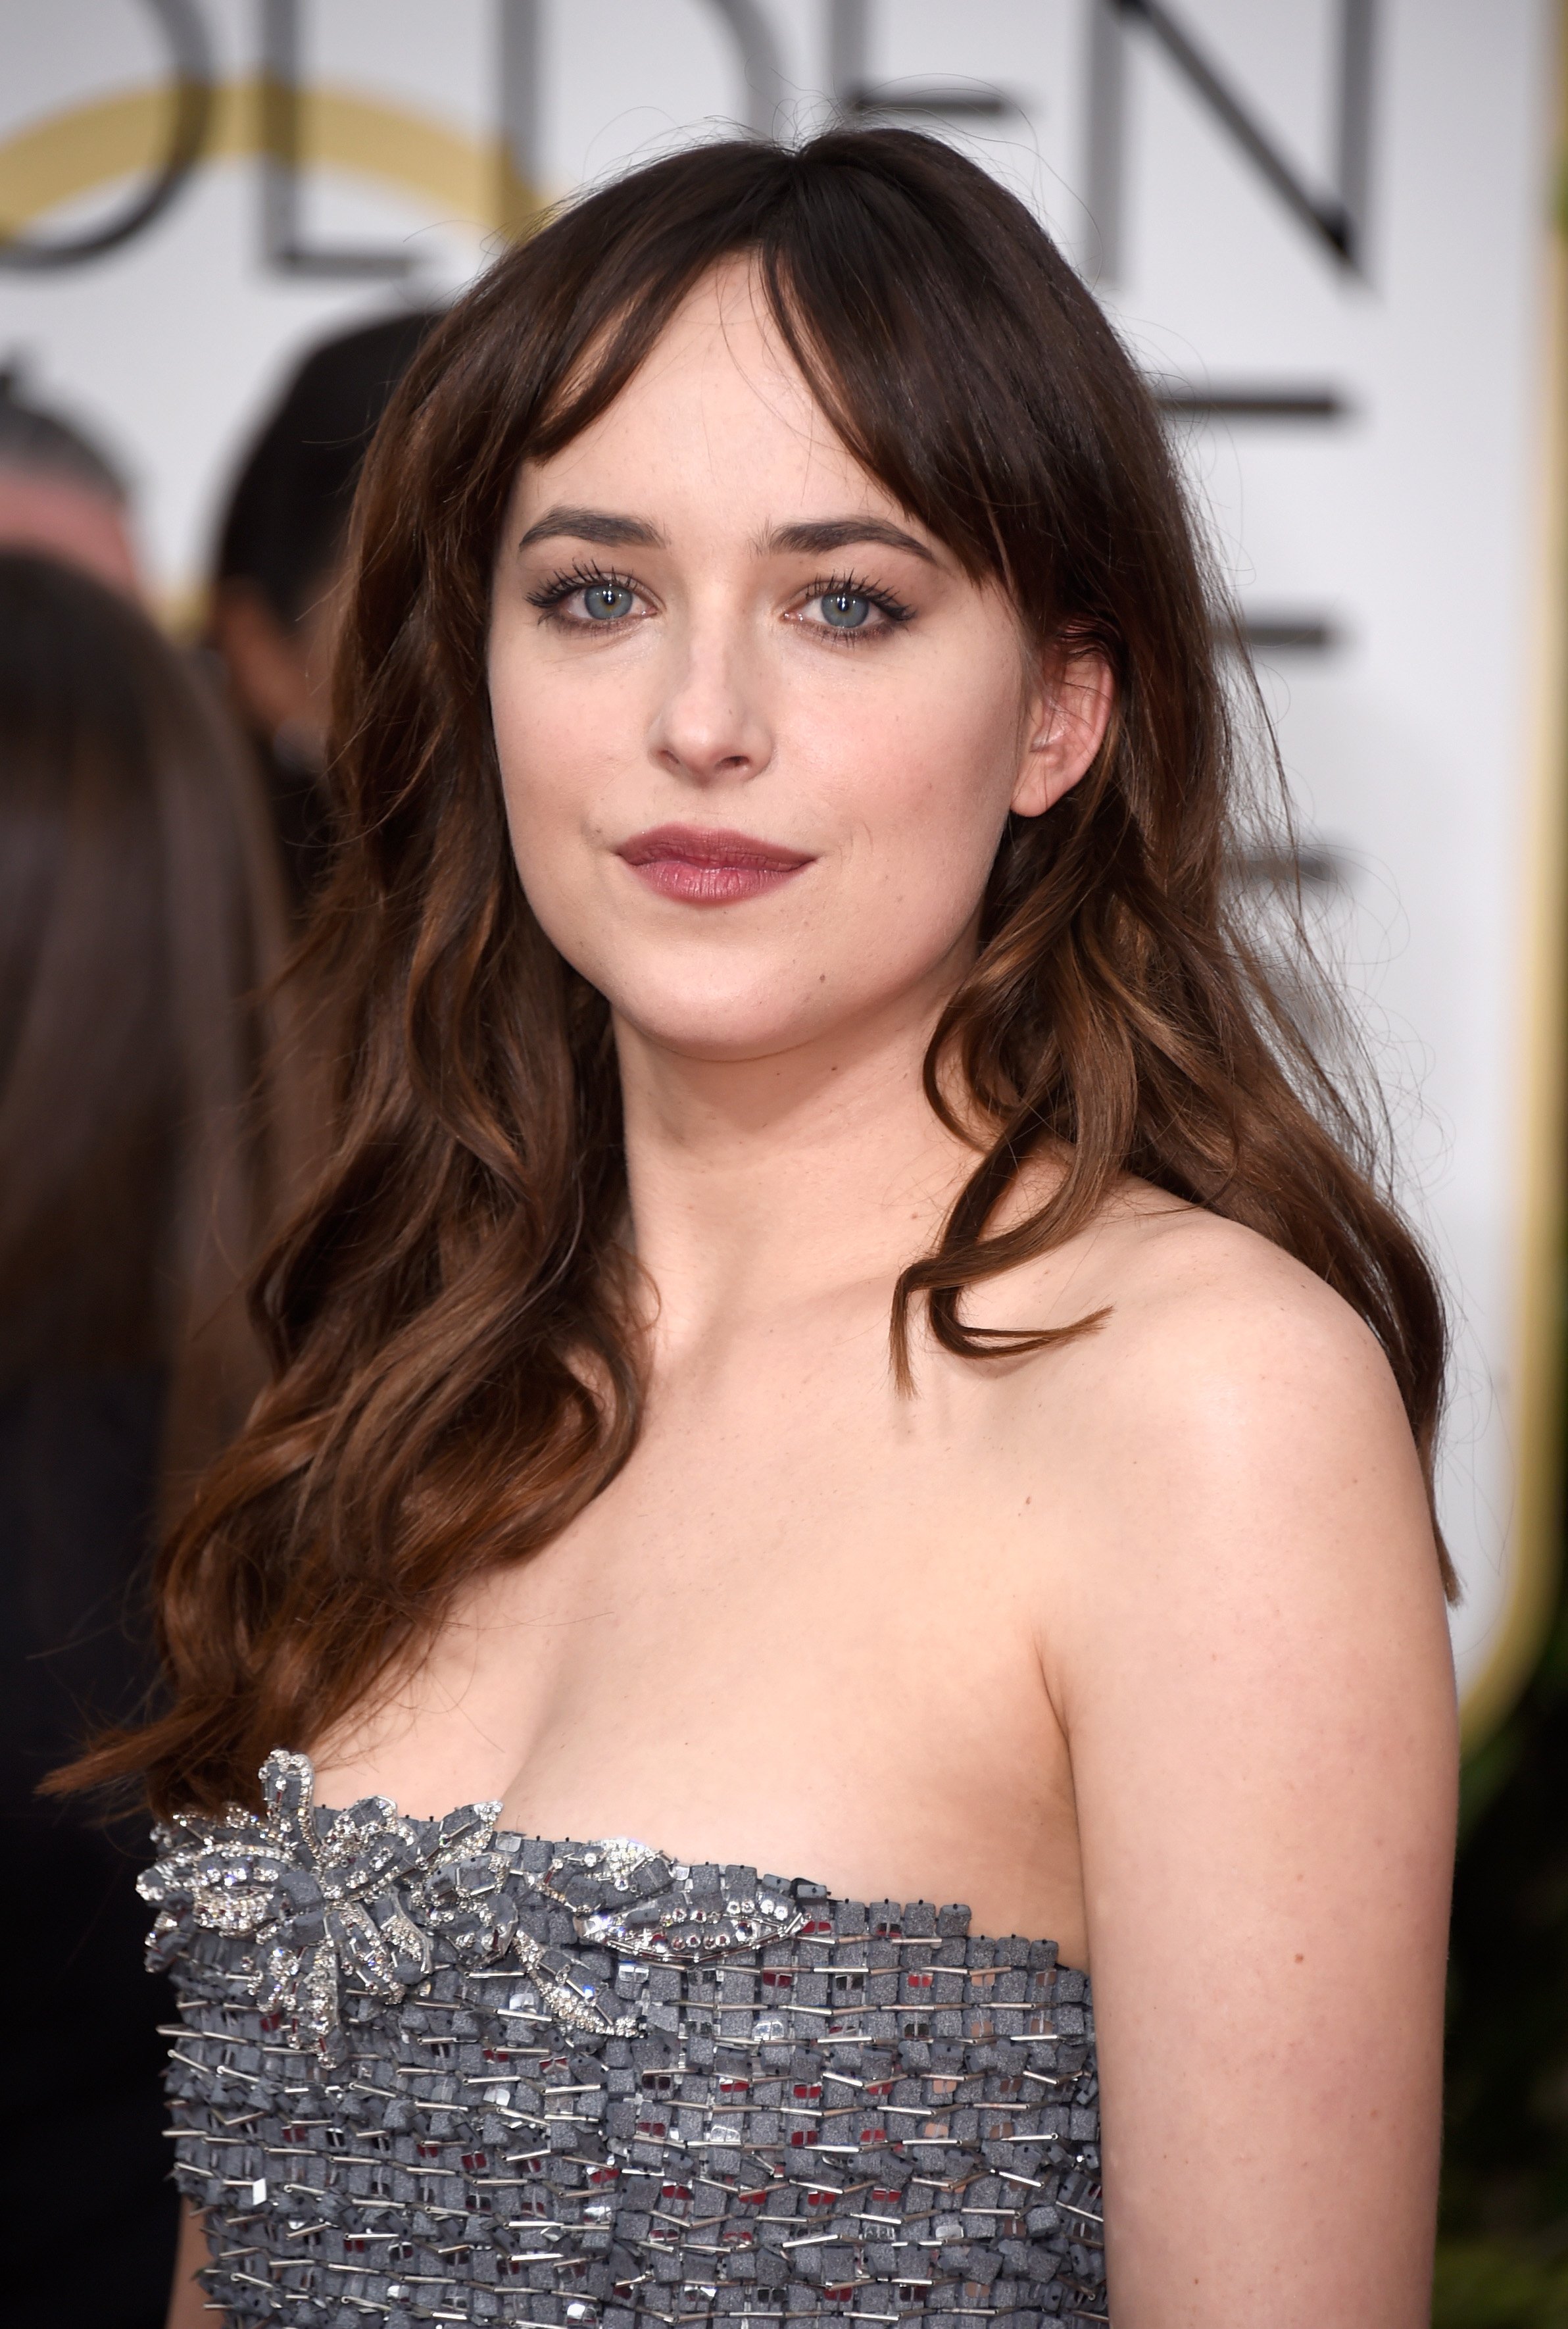 Actress Dakota Johnson attends the 72nd Annual Golden Globe Awards at The Beverly Hilton Hotel on Jan. 11, 2015 in Beverly Hills, California. (Frazer Harrison—Getty Images)